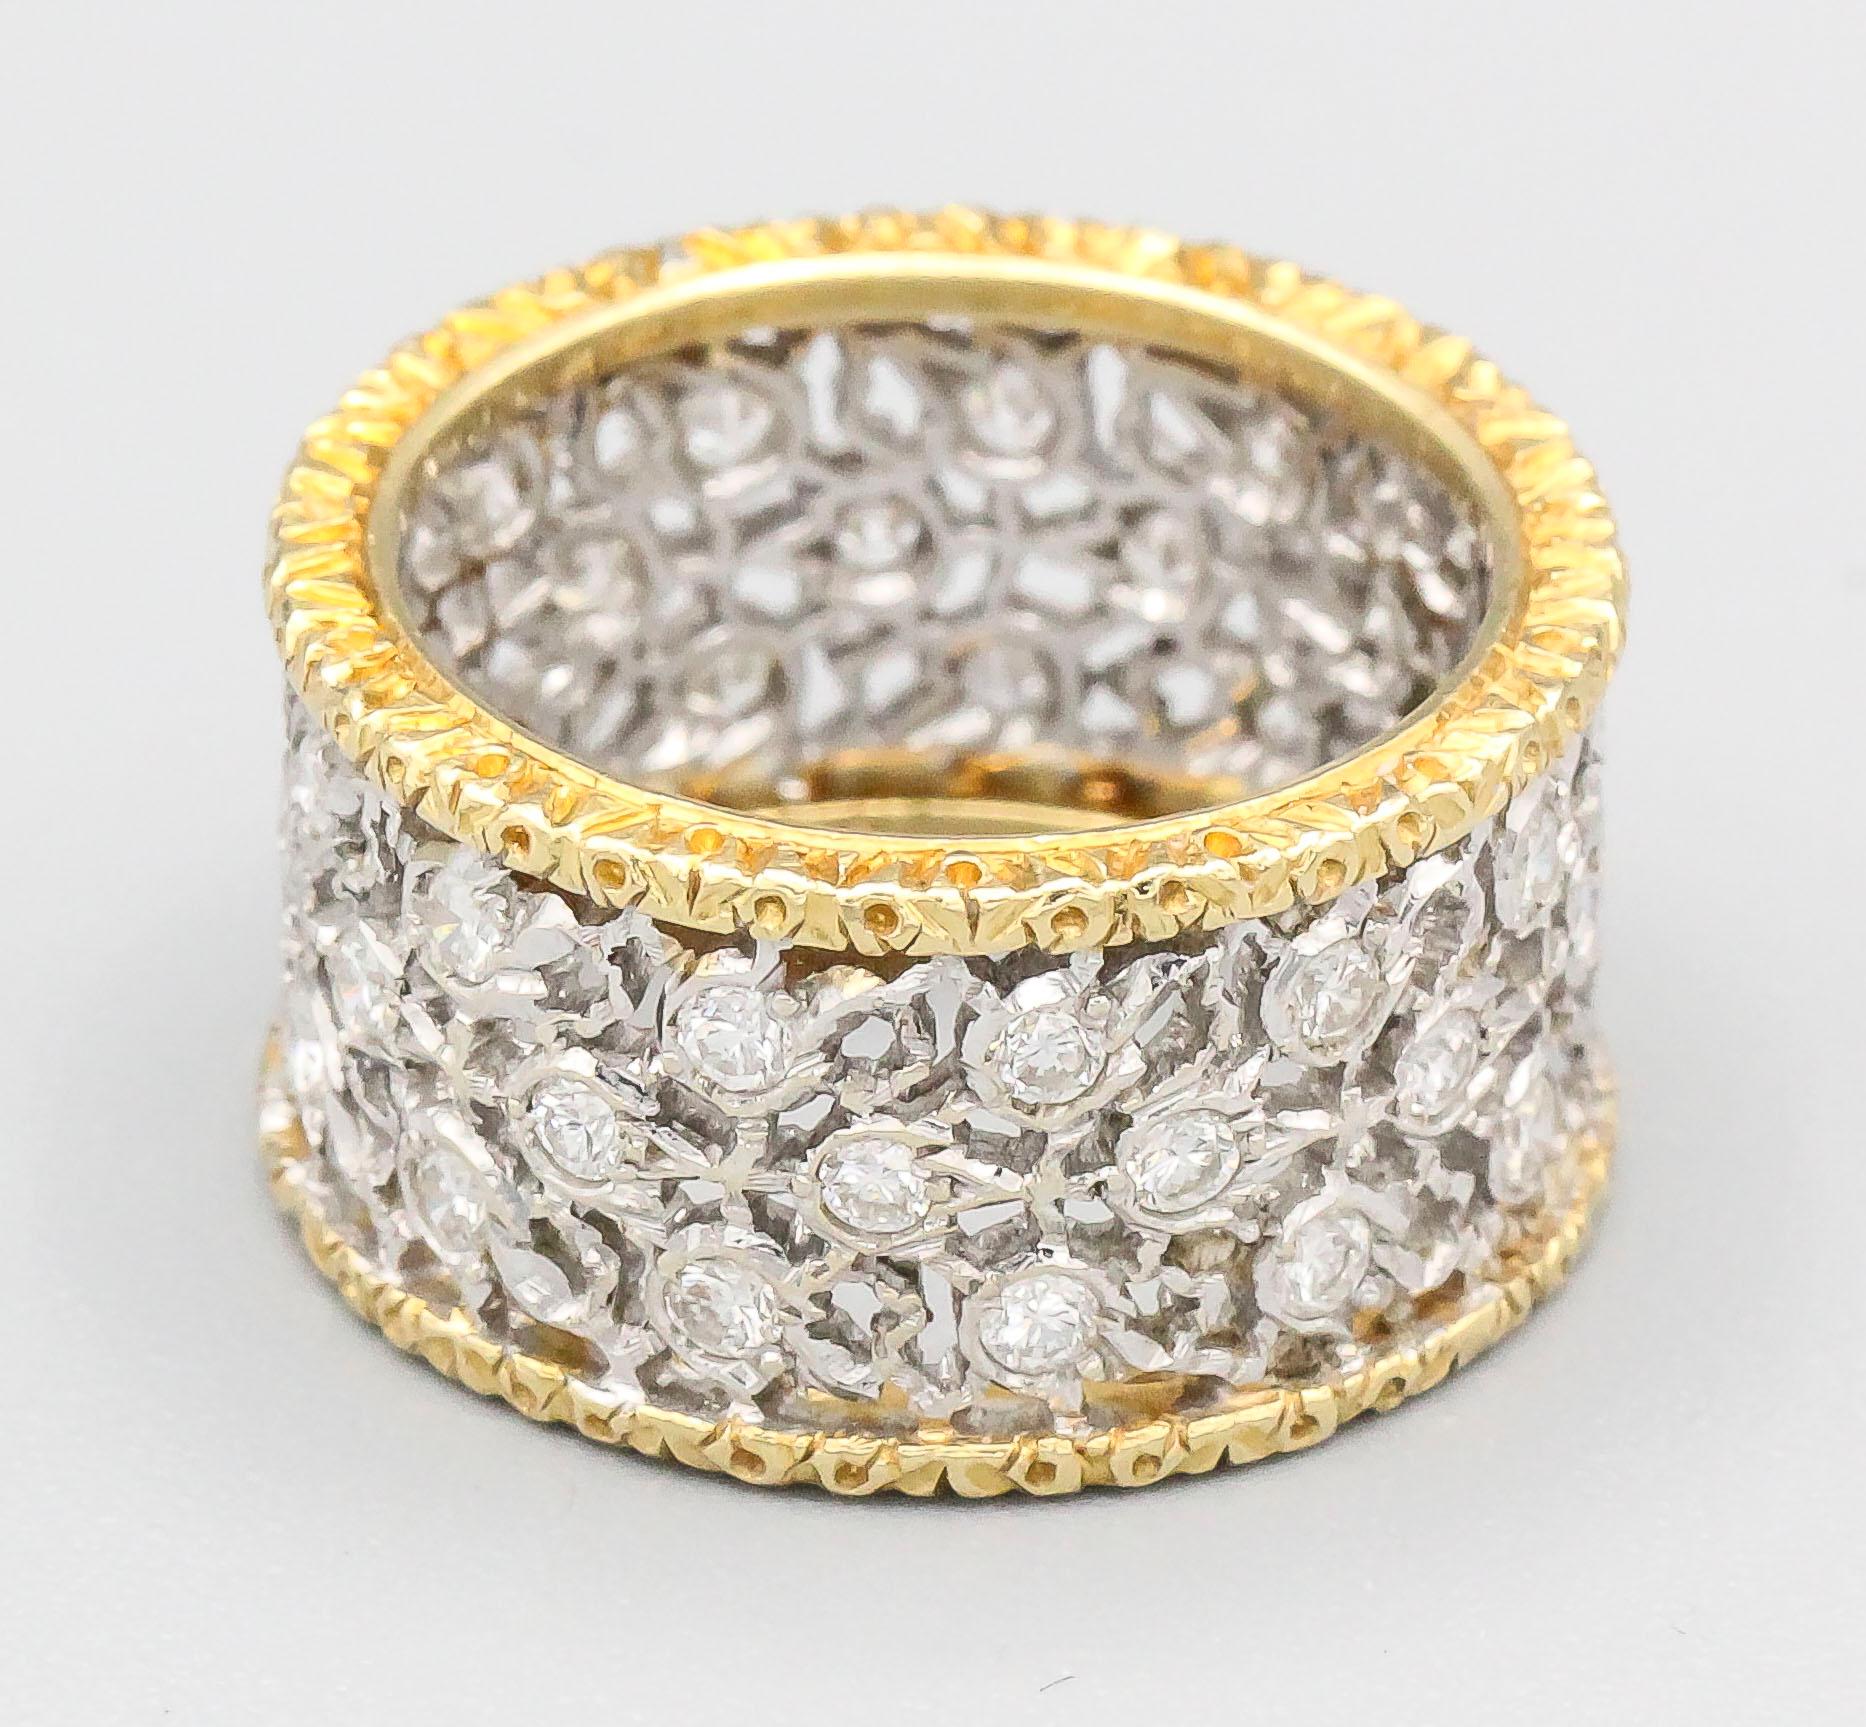 Fine 18K yellow gold and diamond band ring by Mario Buccellati. It features a three row leaf motif with high grade round brilliant cut diamonds of approx. 1.00 cts. Size 4.

Hallmarks: M. Buccellati, Italy, 750, Italian standard marks.